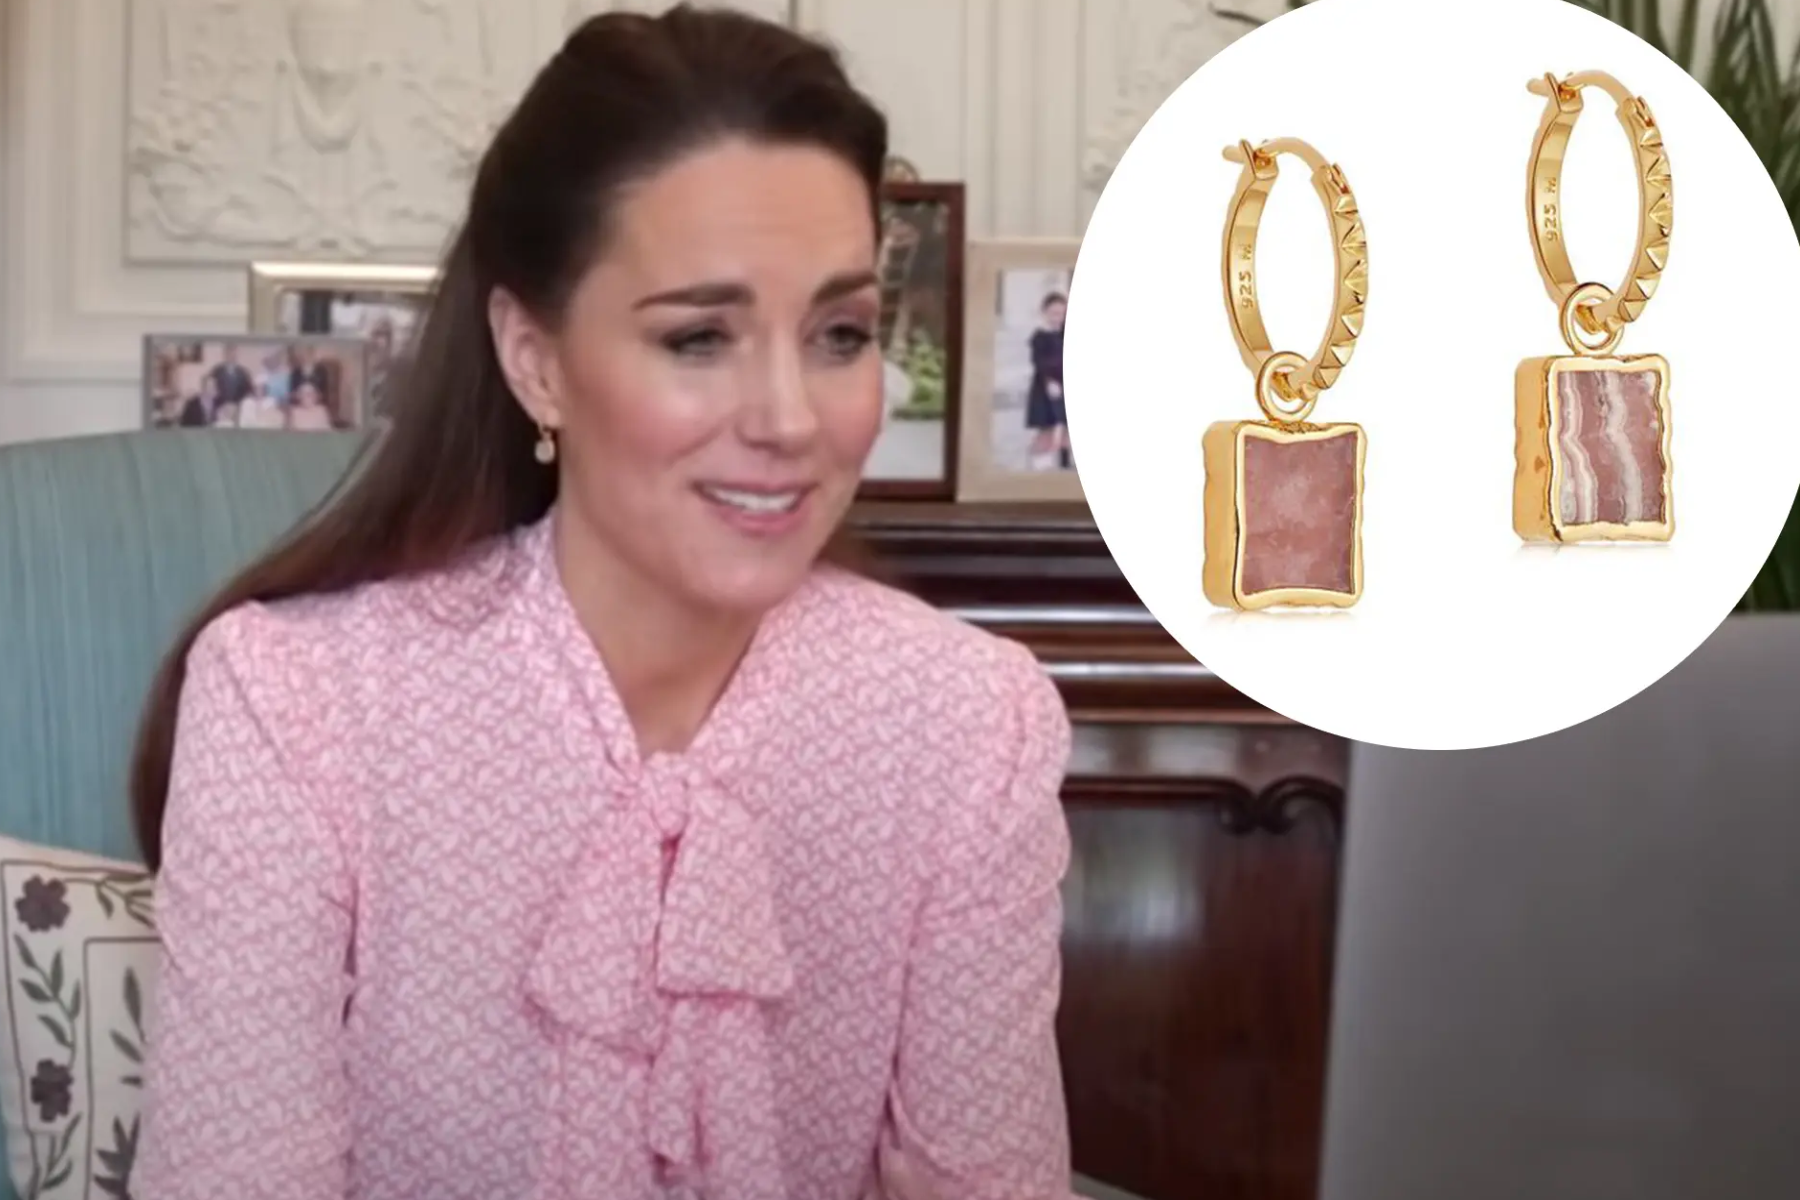 Kate Middleton is dressed in a pink blouse and £85 gemstone earrings on a white circle